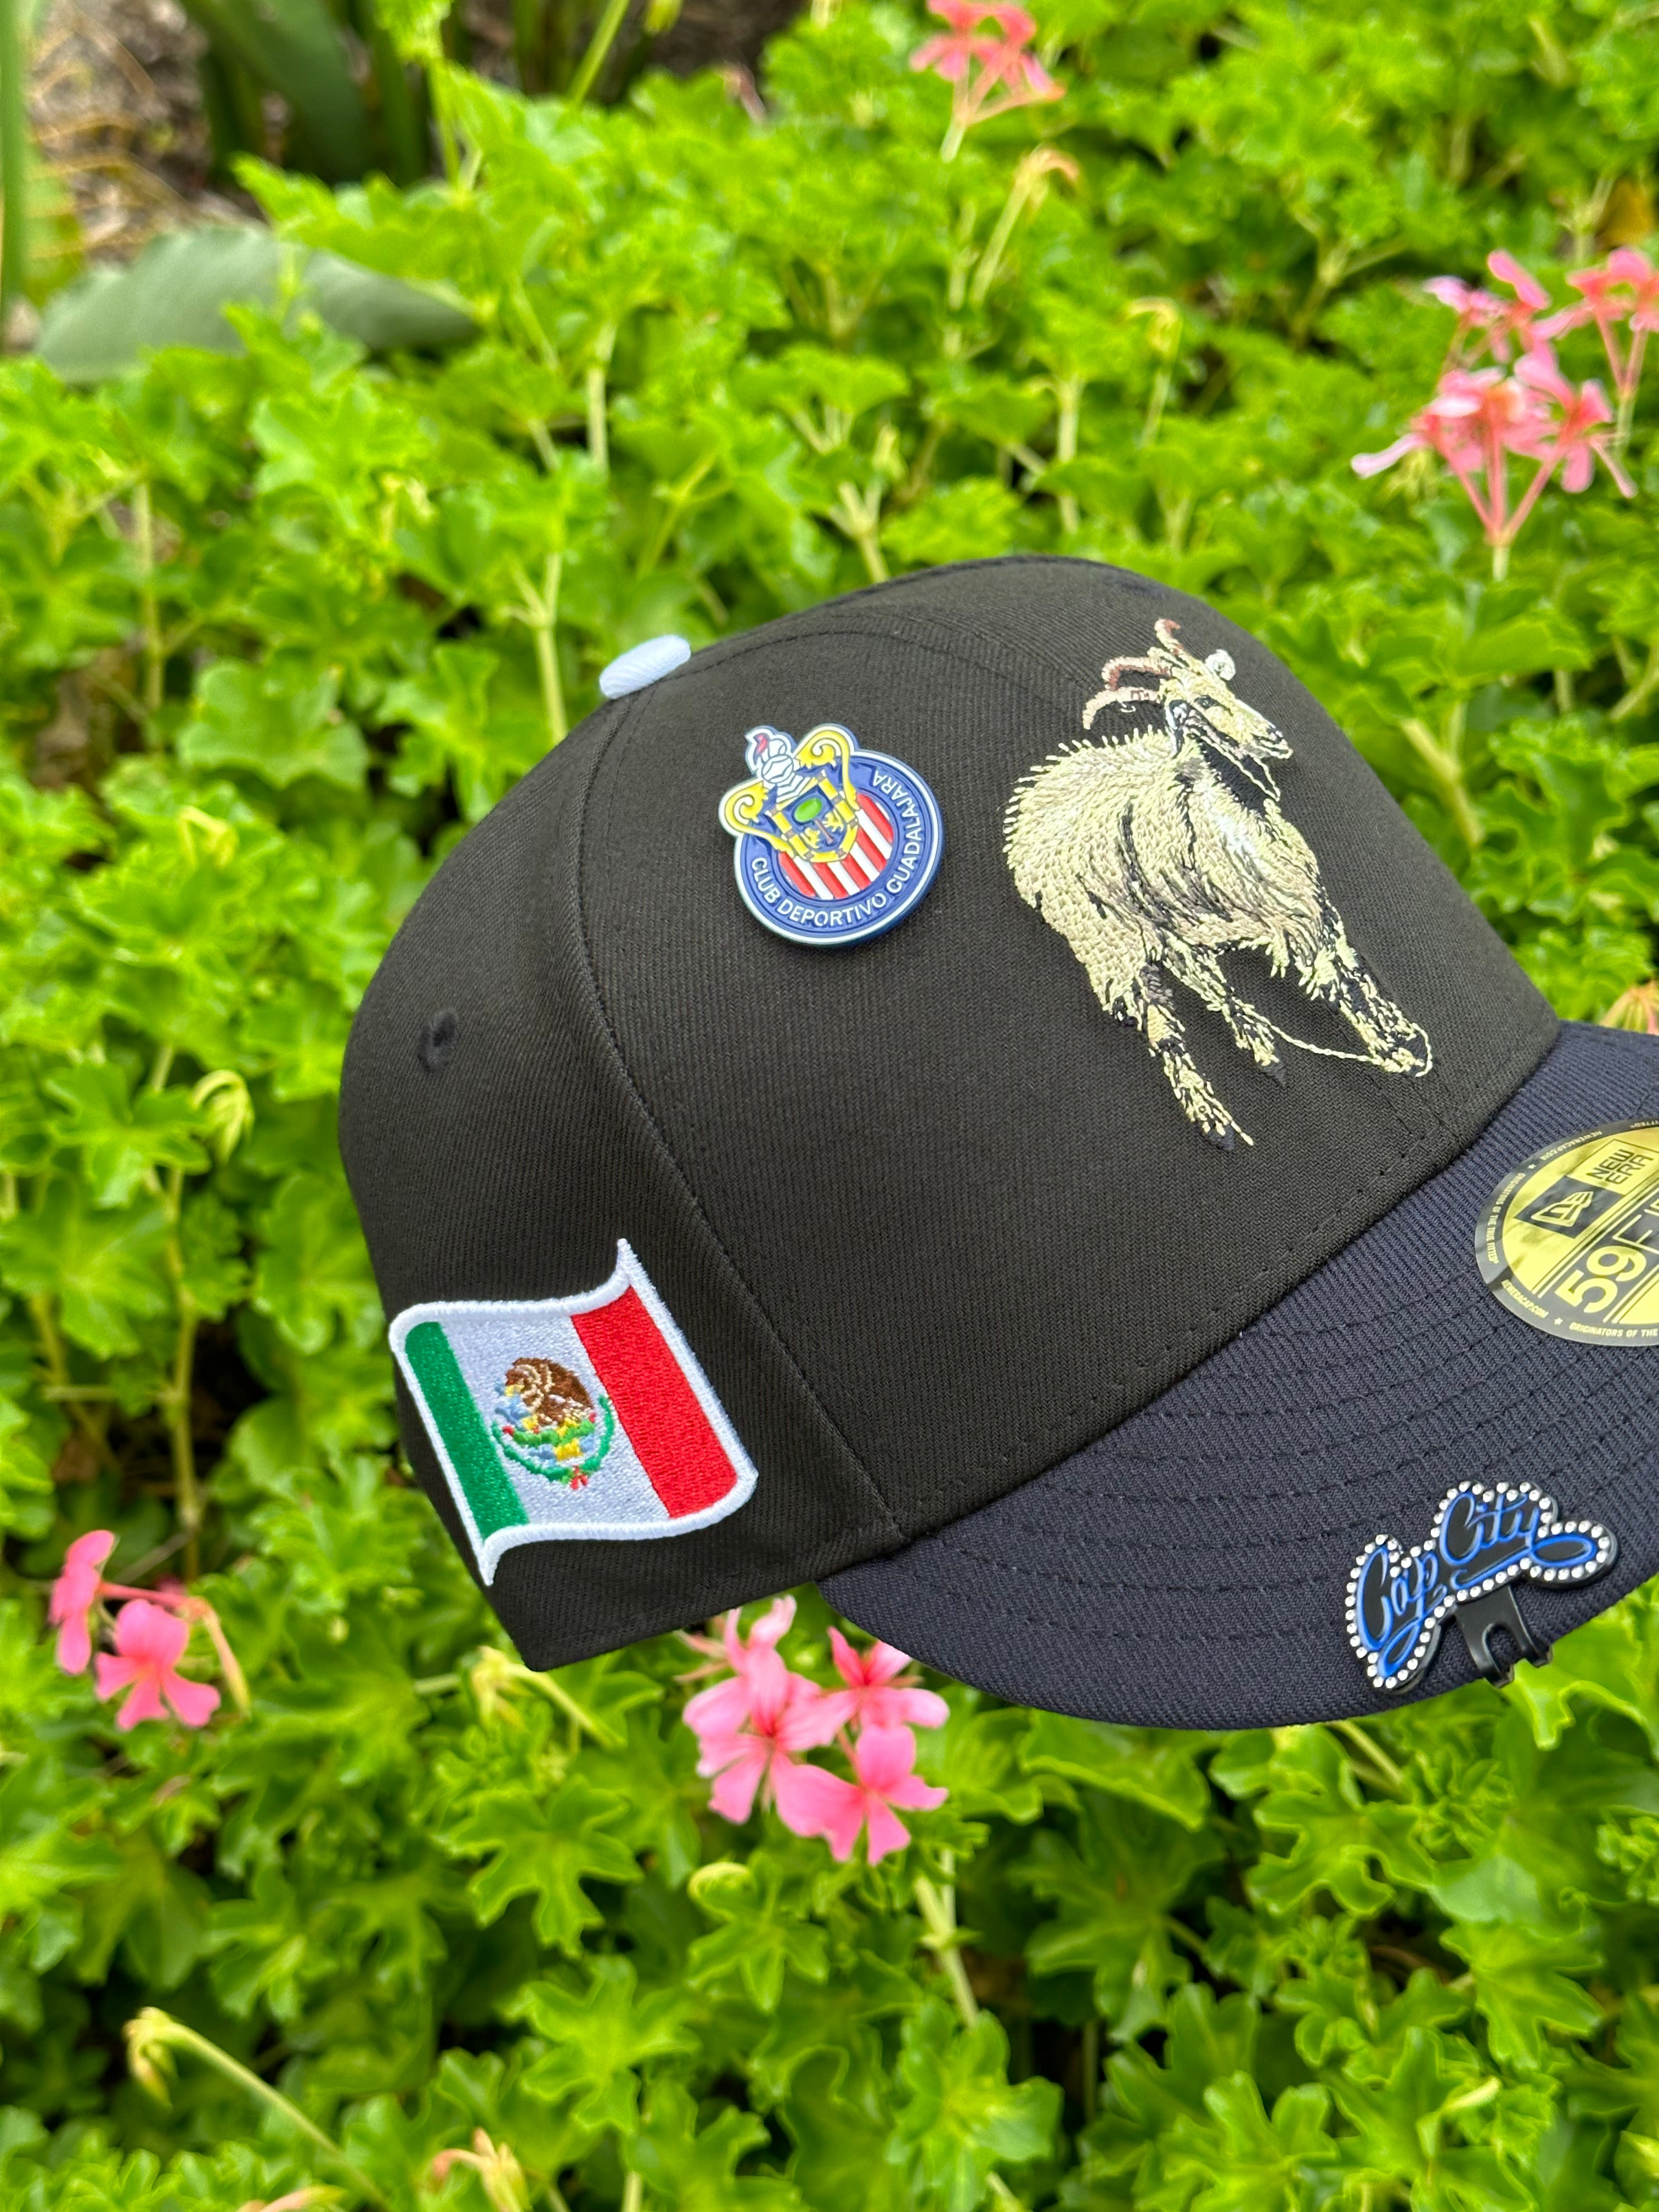 NEW ERA EXCLUSIVE 59FIFTY BLACK/NAVY MEXICO "THE GOAT" W/ MEXICO FLAG PATCH